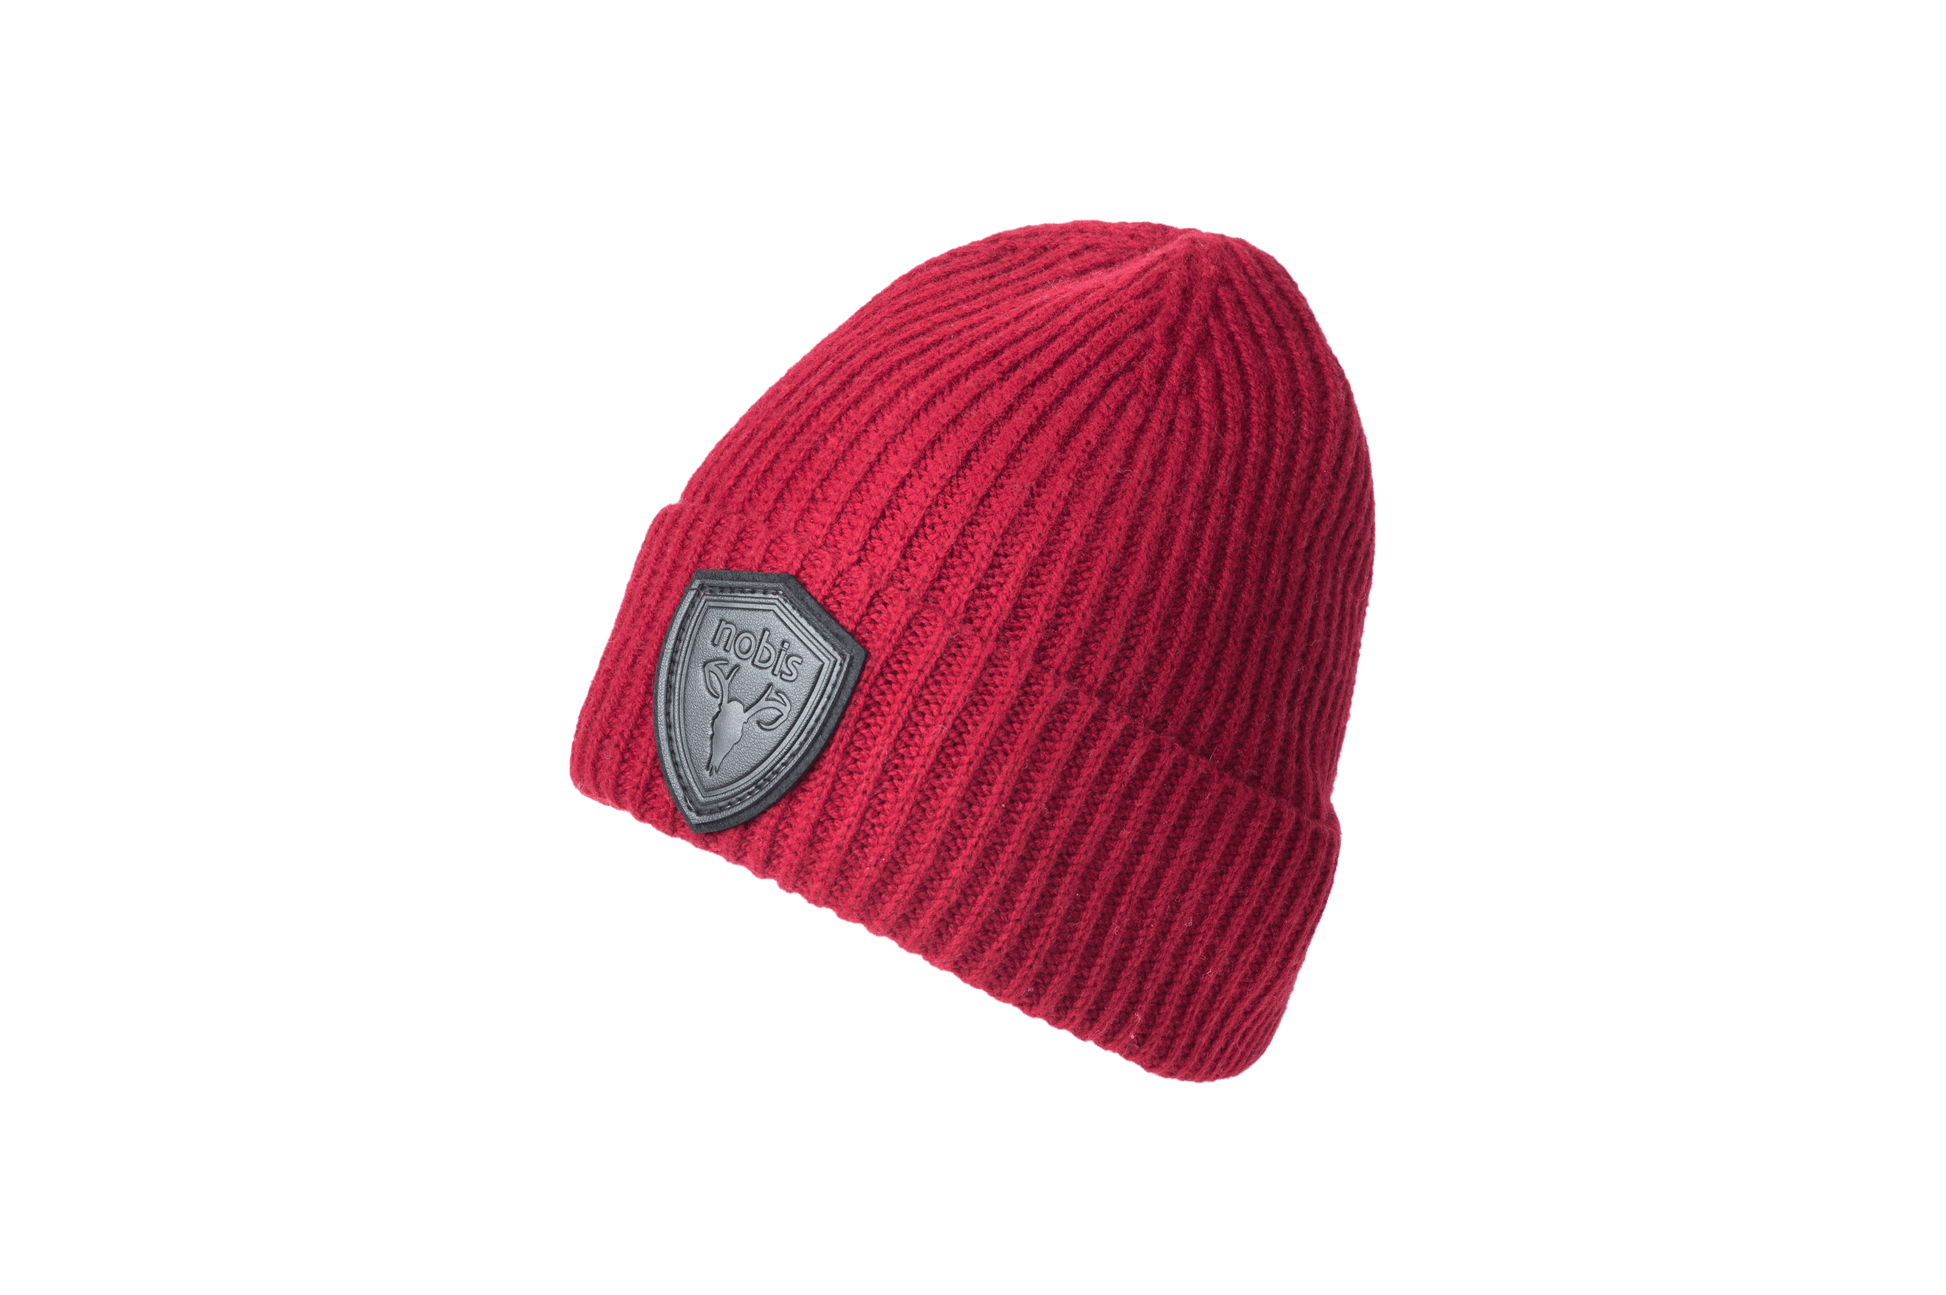 Emer Unisex Tailored Chunky Knit Beanie in extra fine merino wool blend, and black leather Nobis shield logo on cuff, in Rio Red